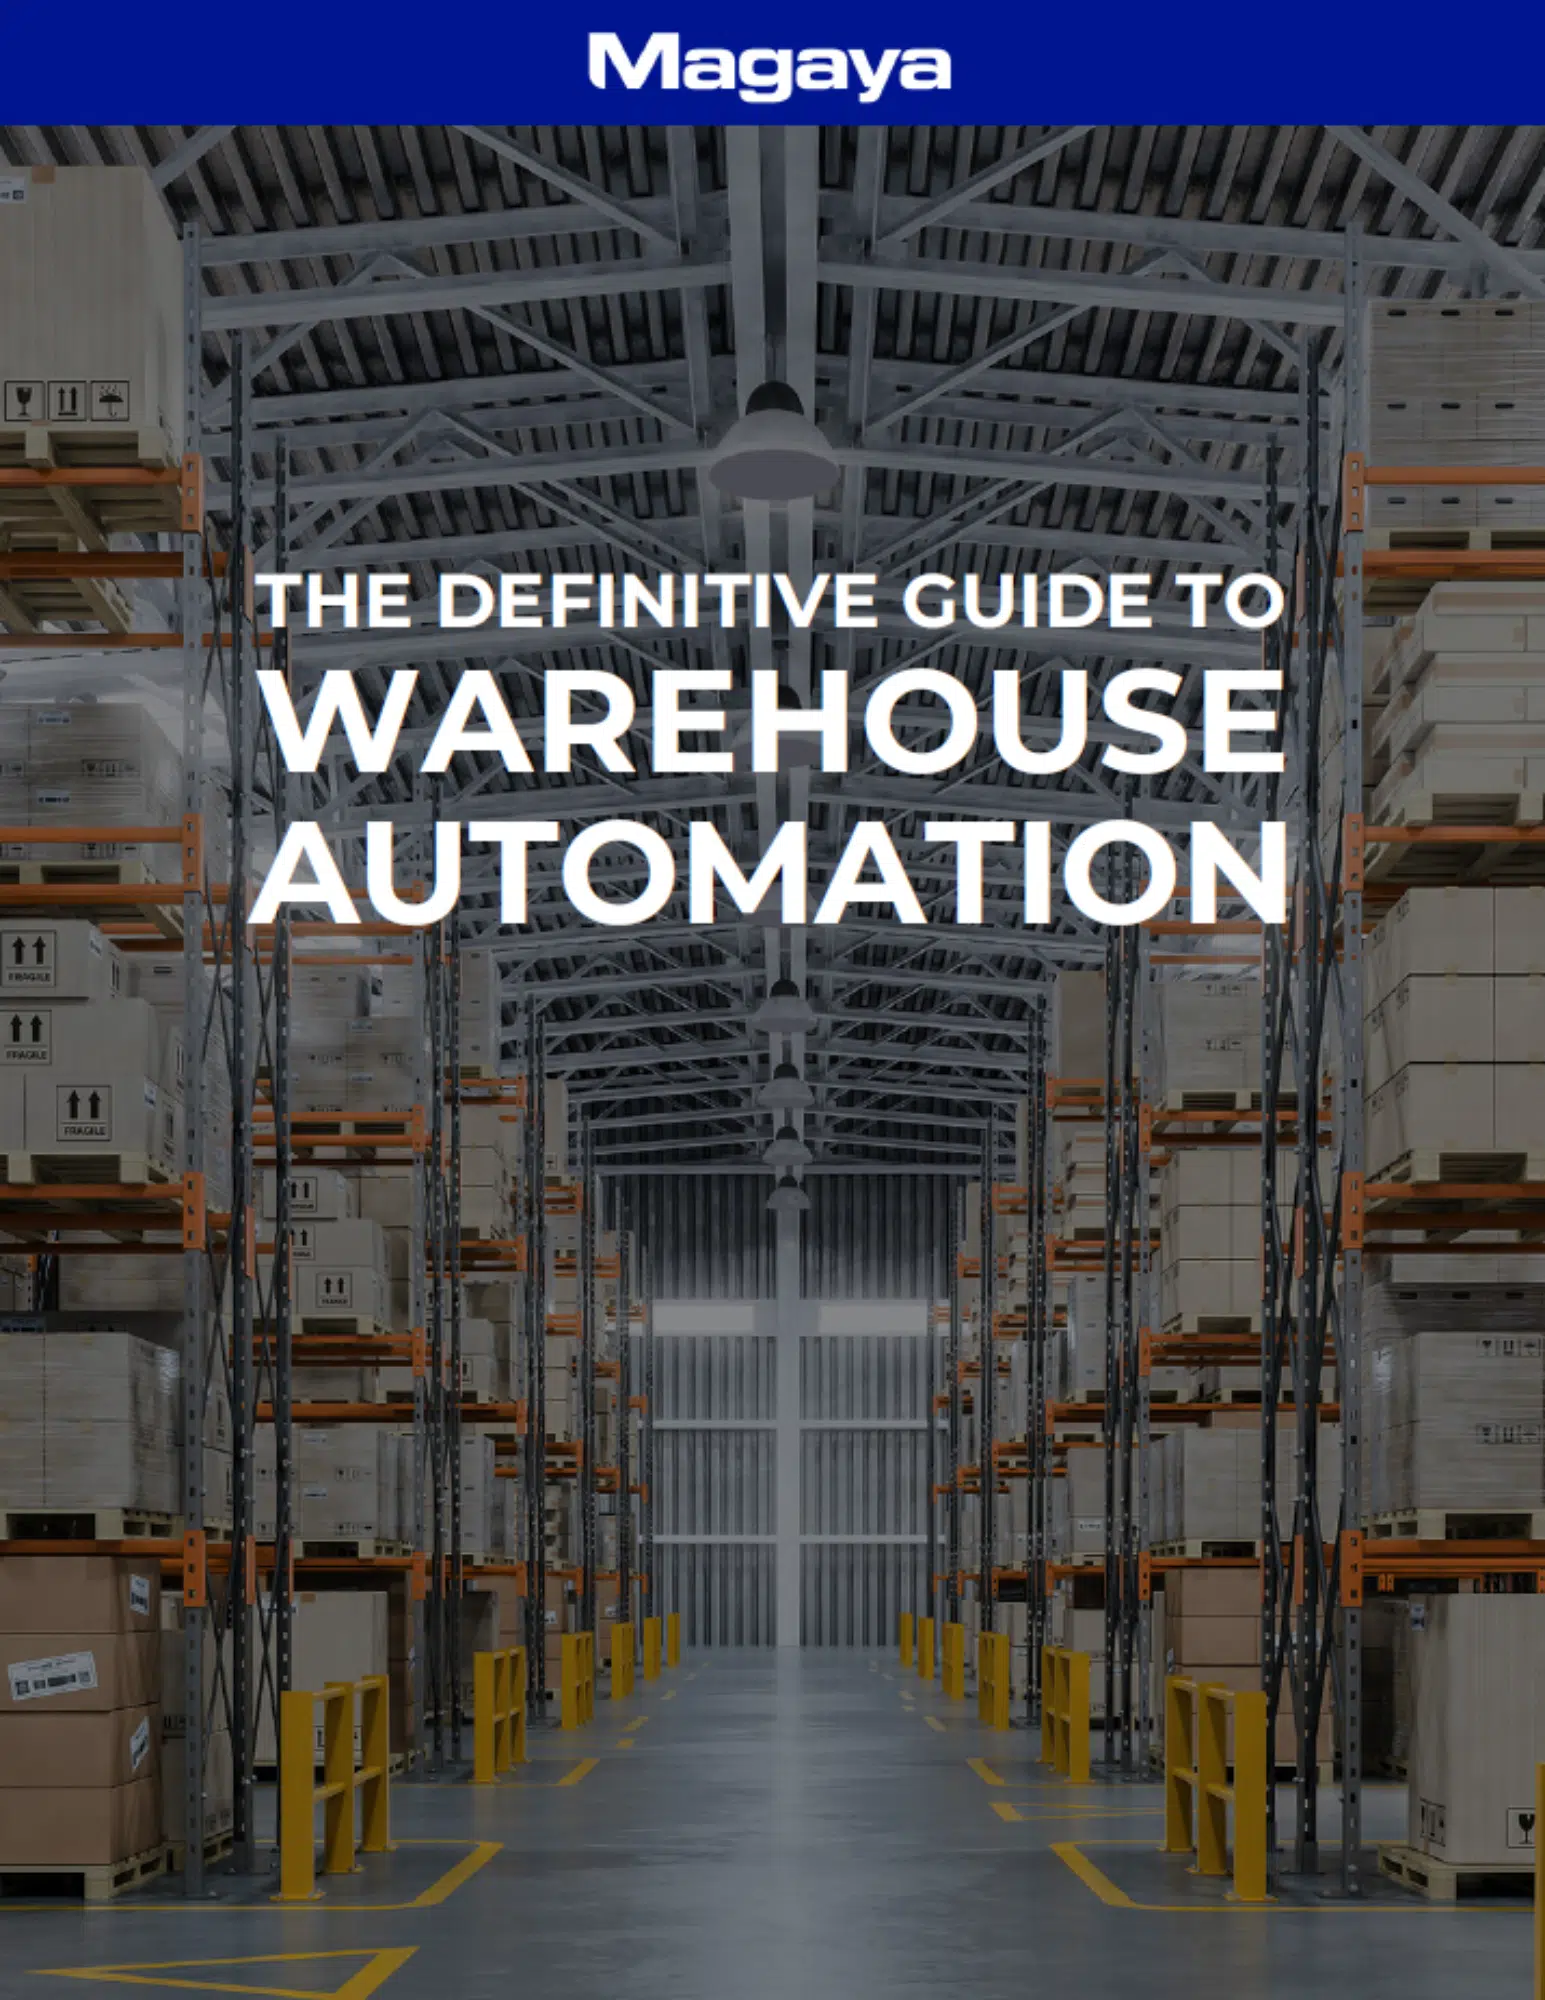 The Definitive Guide to Warehouse Automation